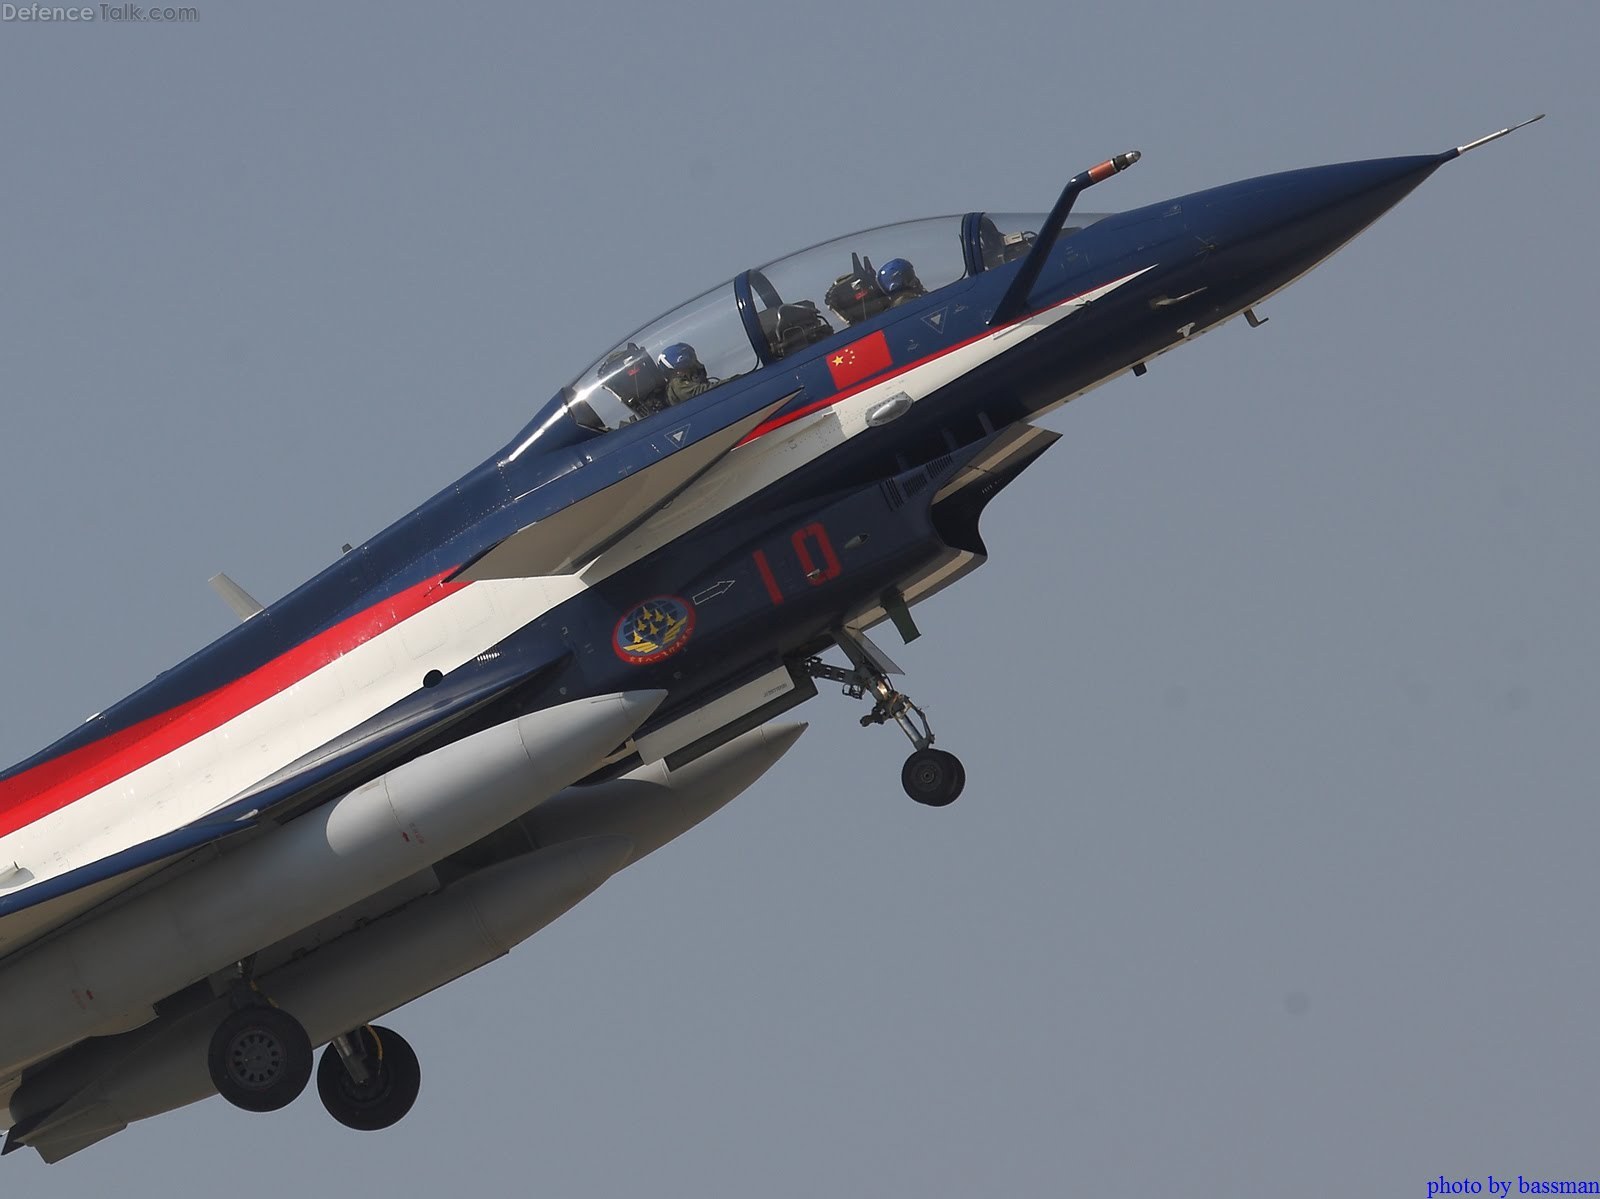 J-10 Fighter - Airshow China 2010